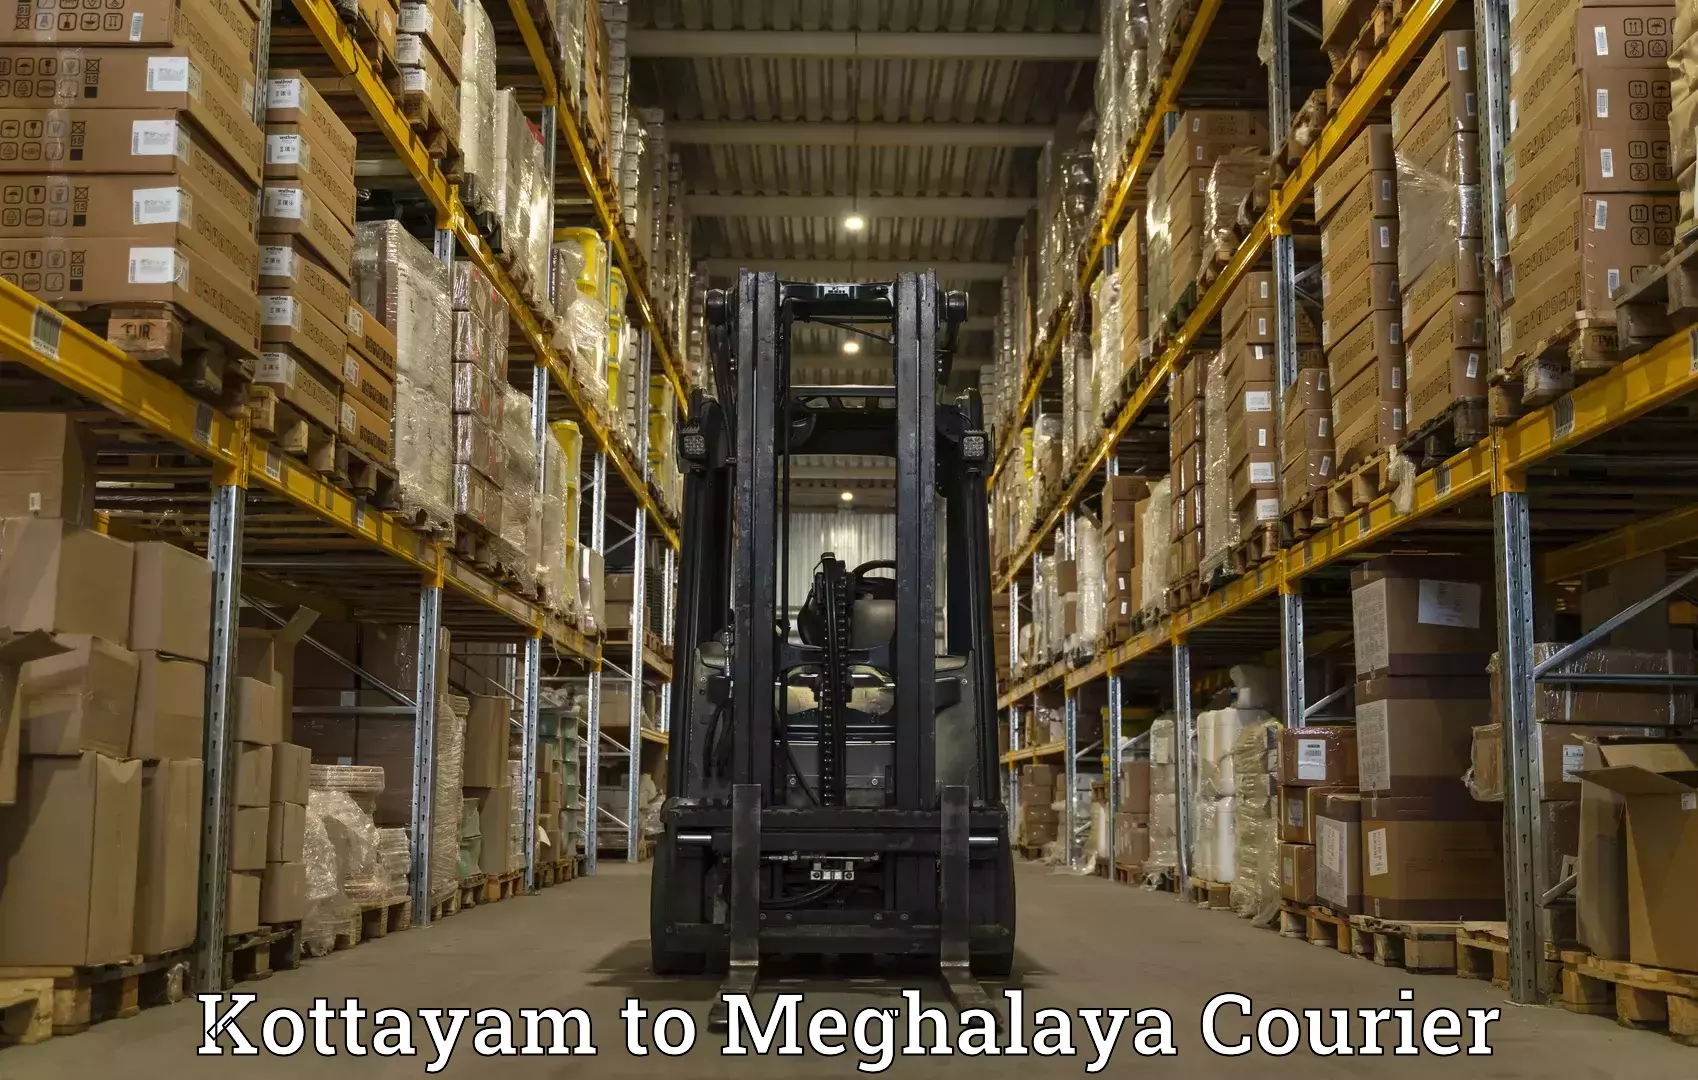 State-of-the-art courier technology Kottayam to Umsaw